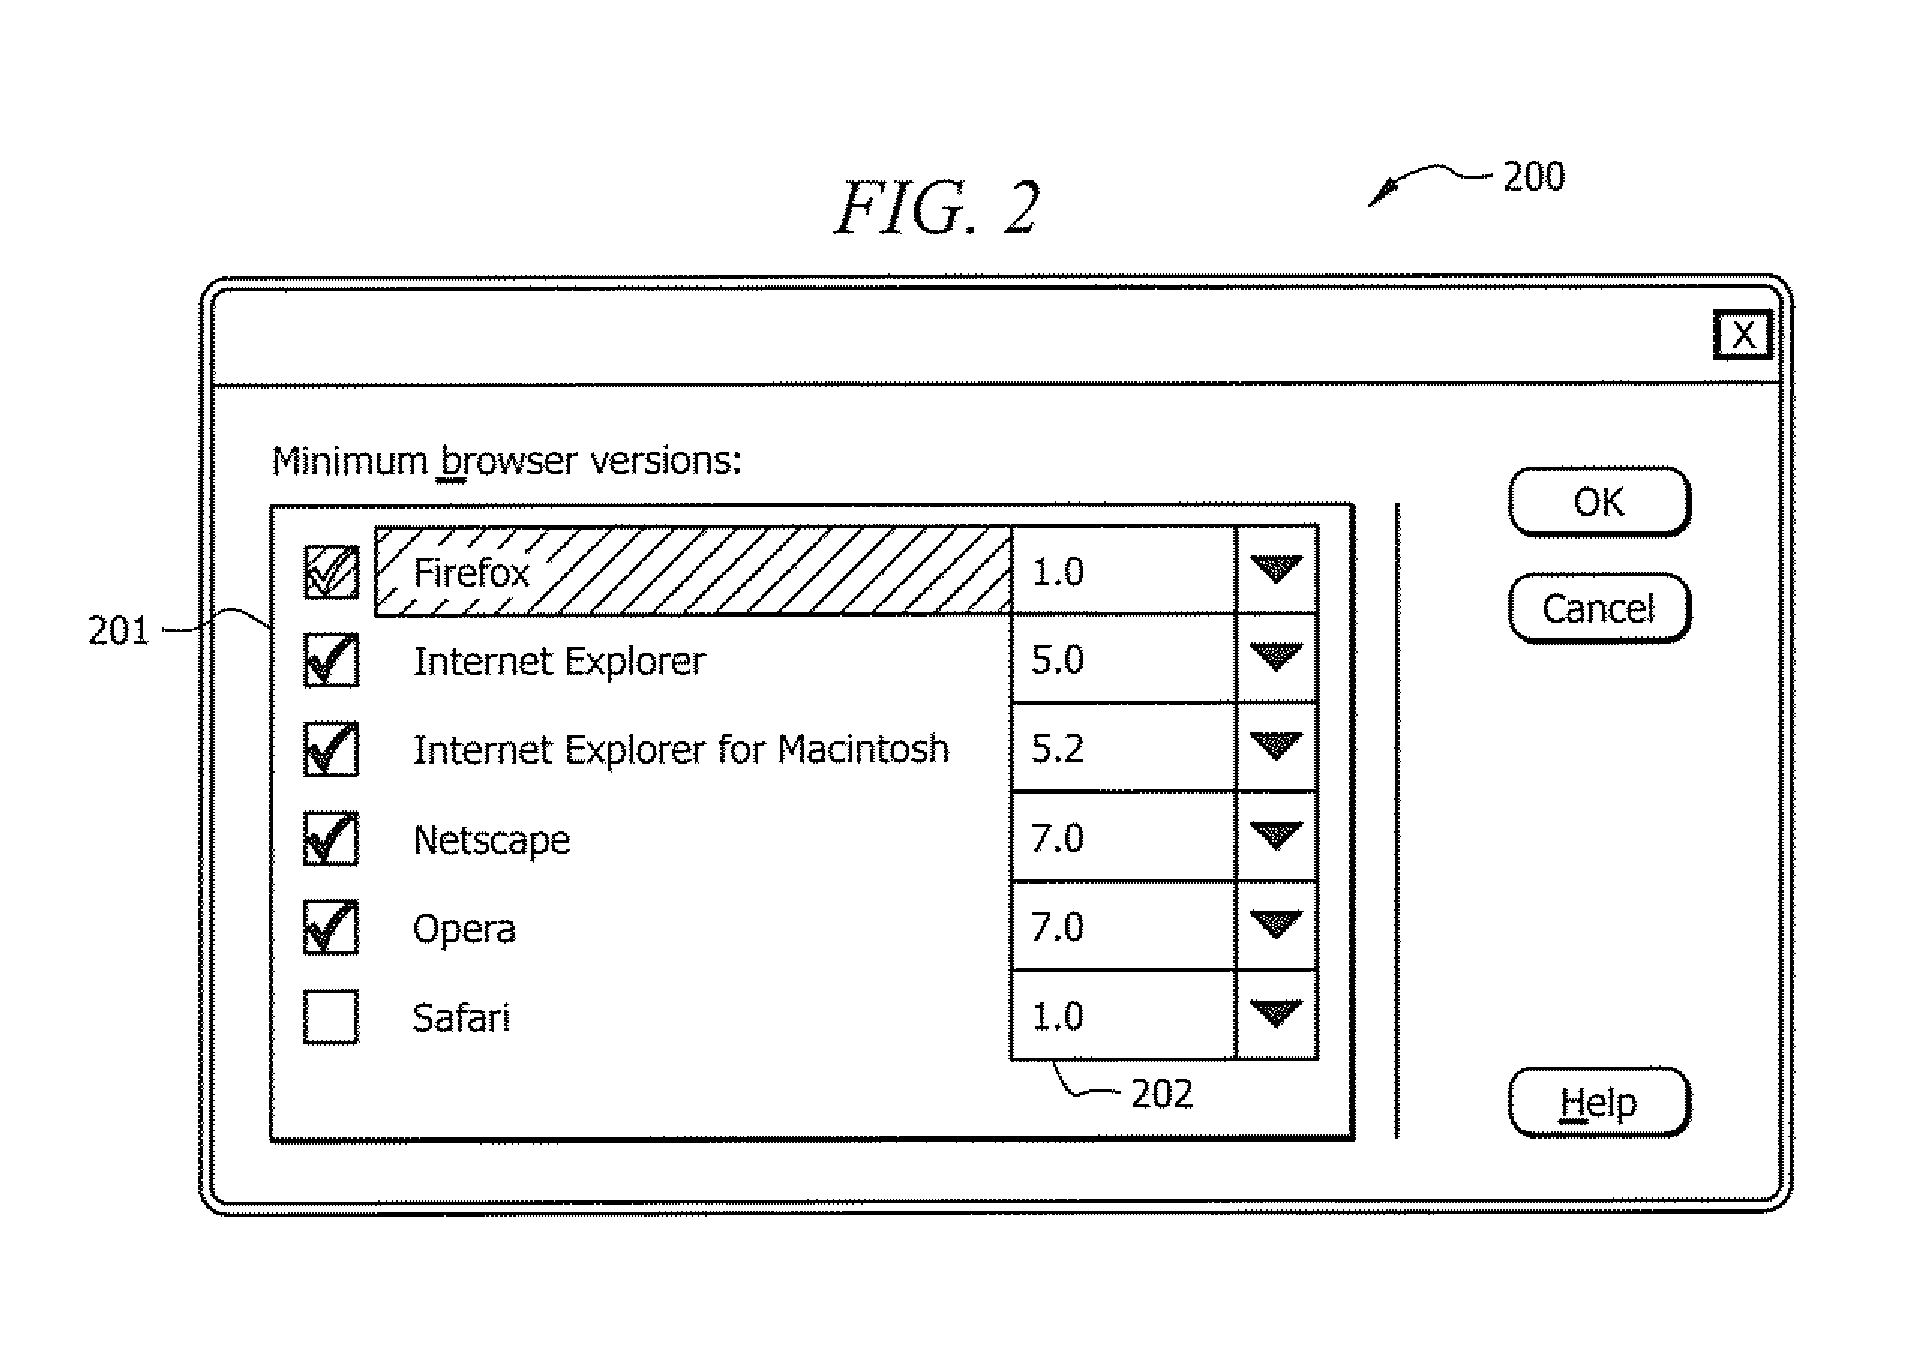 Systems and methods for solving rendering compatibility problems across electronic document viewers